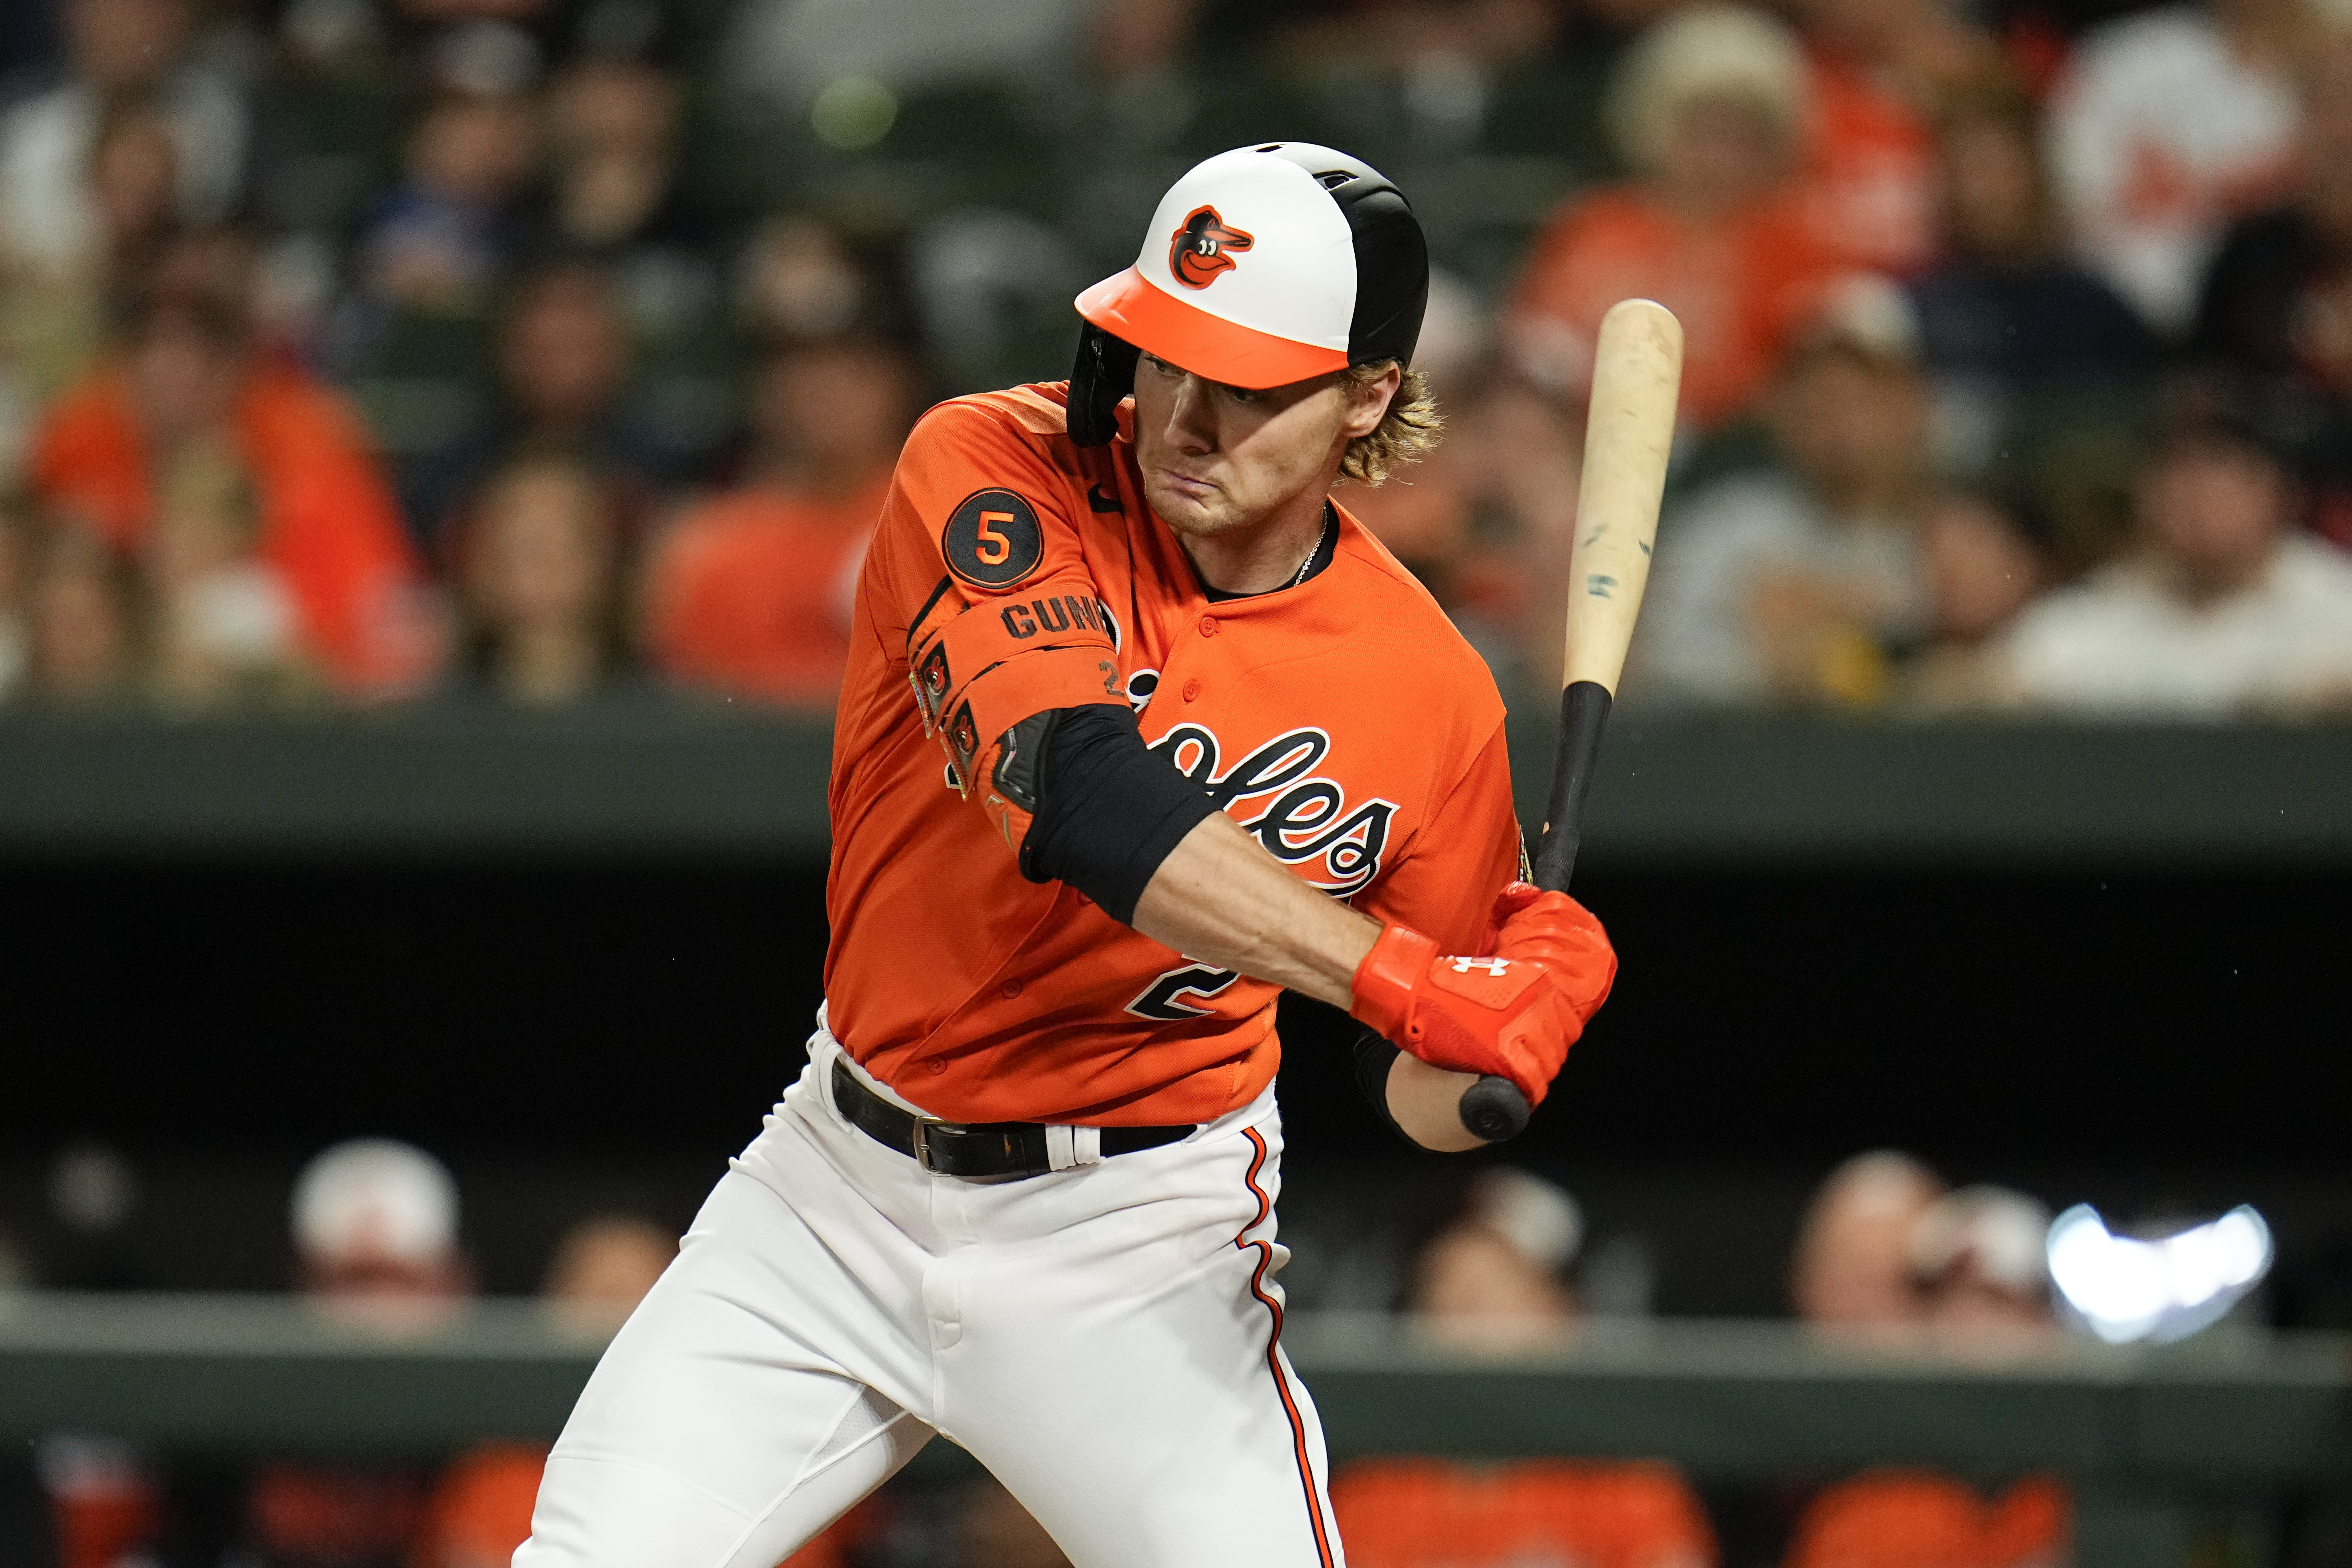 Orioles to play at 1 p.m. Saturday, well before Billy Joel and